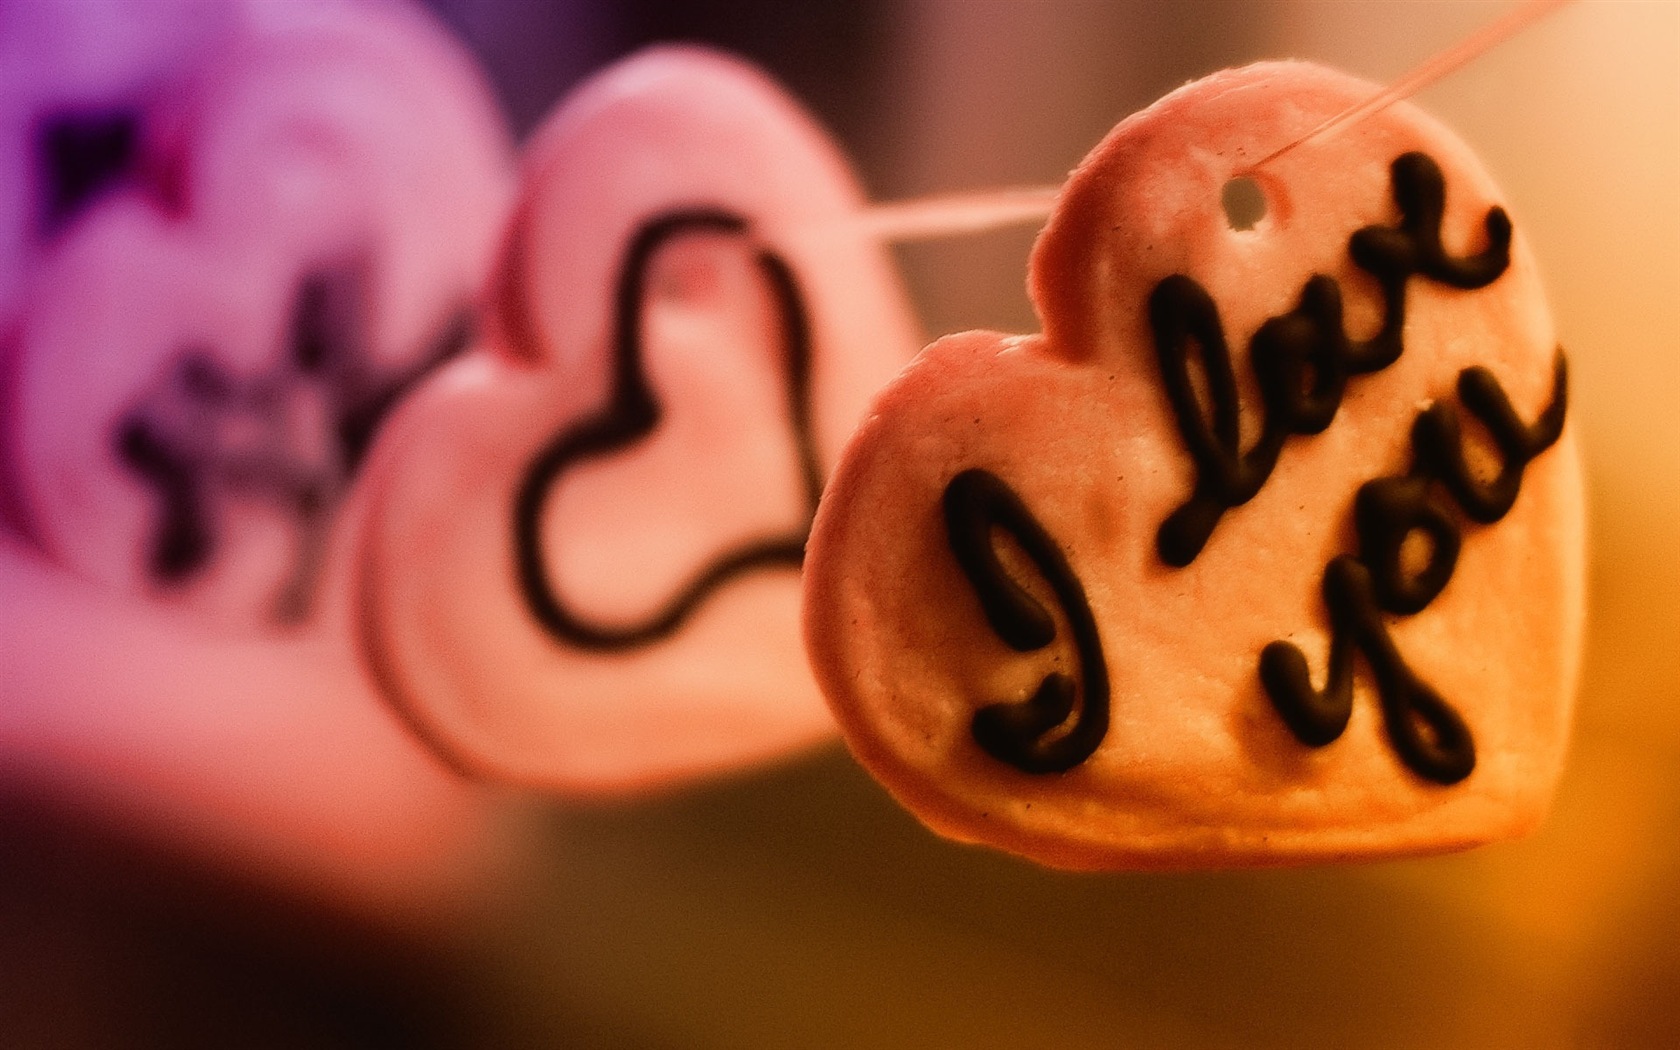 Warm and romantic Valentine's Day HD wallpapers #4 - 1680x1050